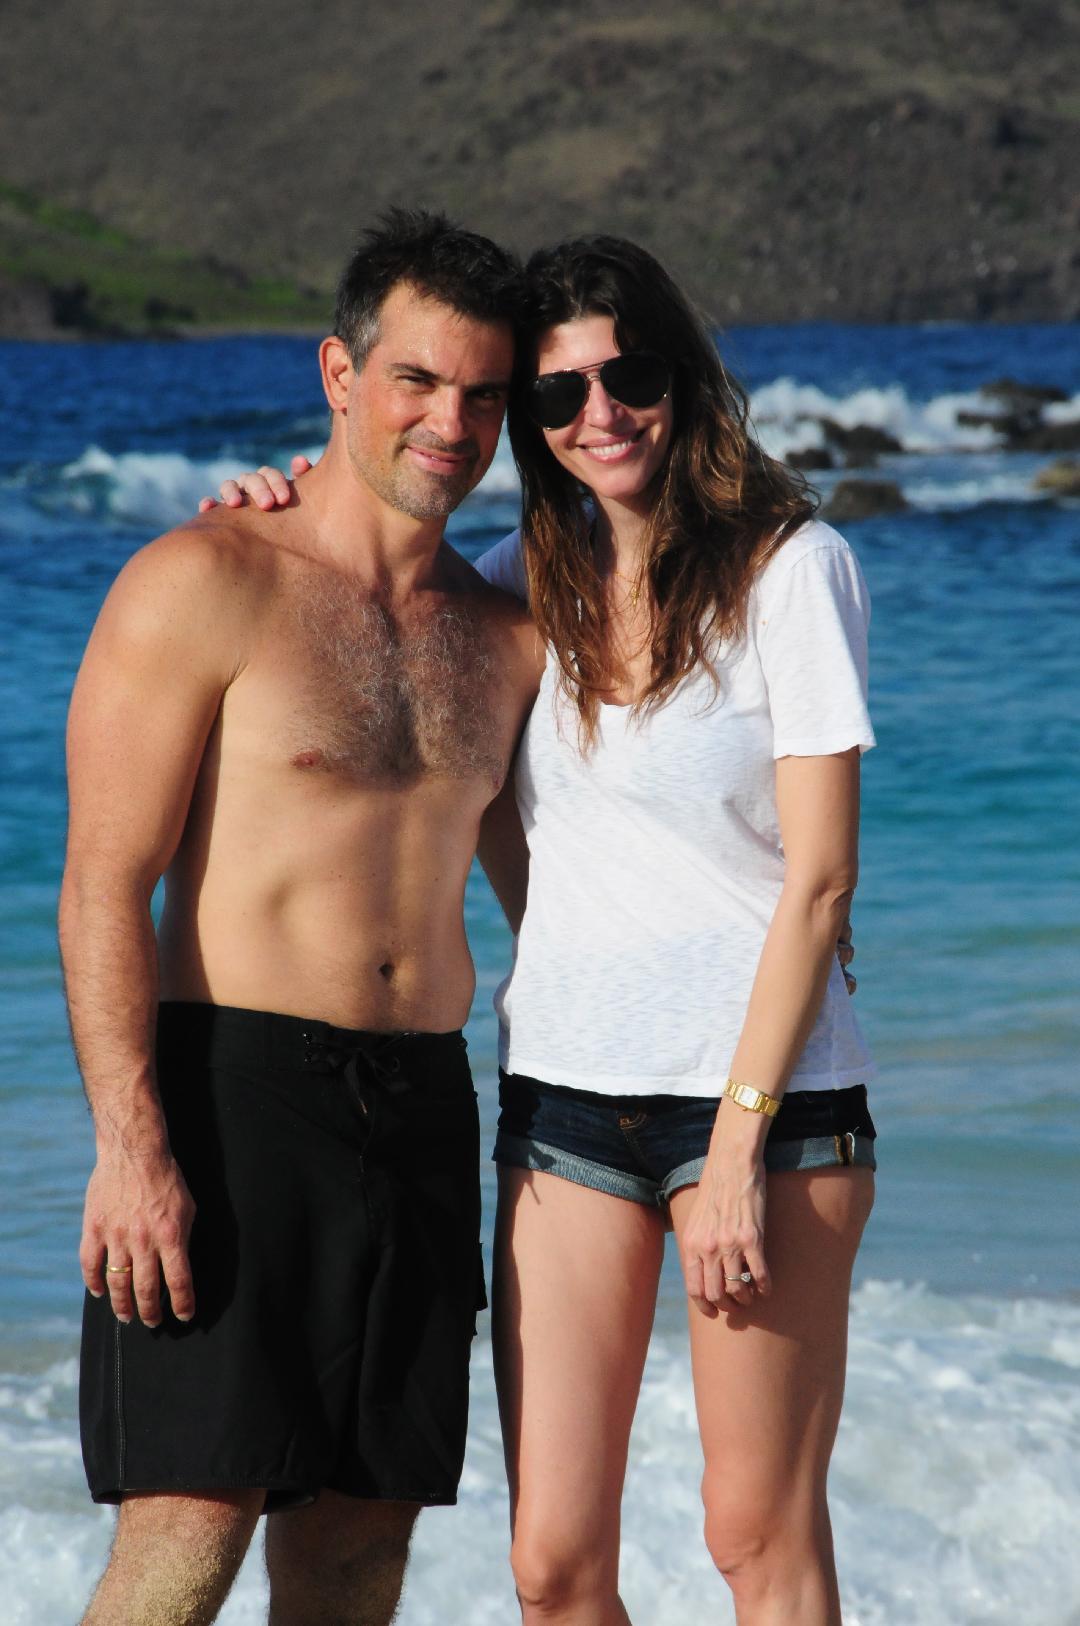 Fotis Dulos died by suicide in 2020 after he was charged with murdering his estranged wife Jennifer Dulos, who vanished in 2019 . Her body has never been found